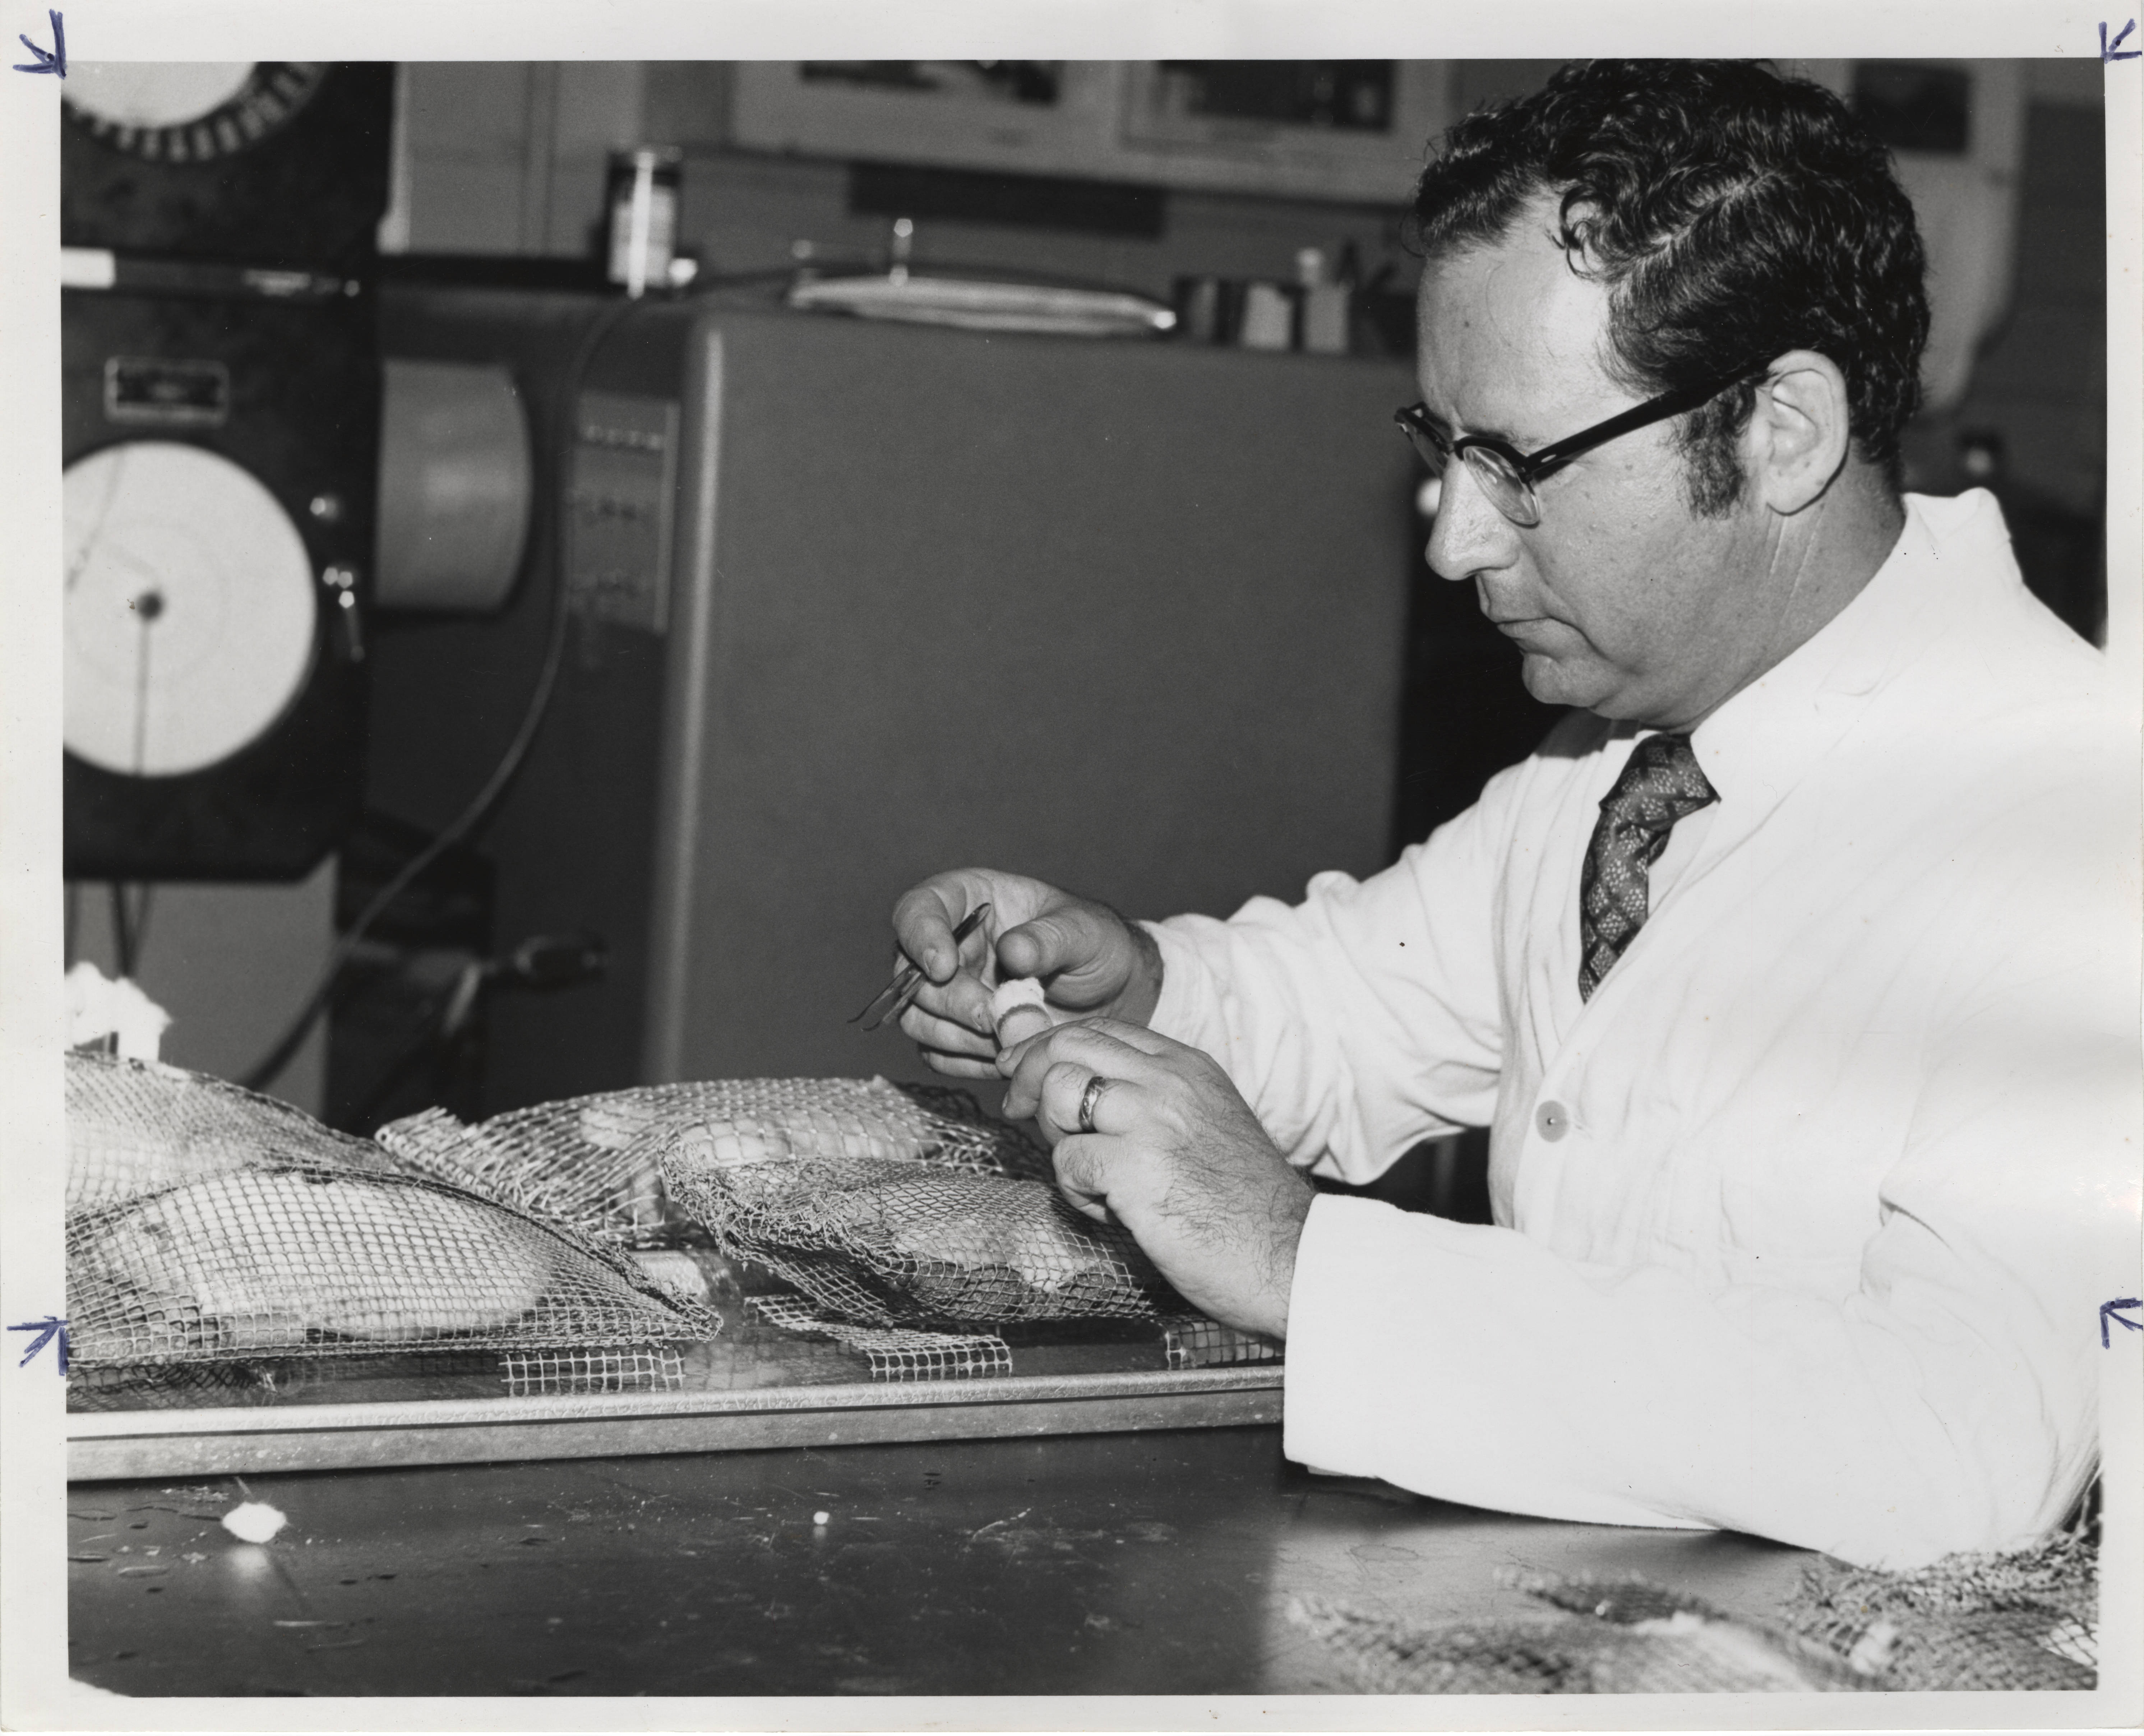  Dr. Sonenshine working on an experiment in the 1960s. 